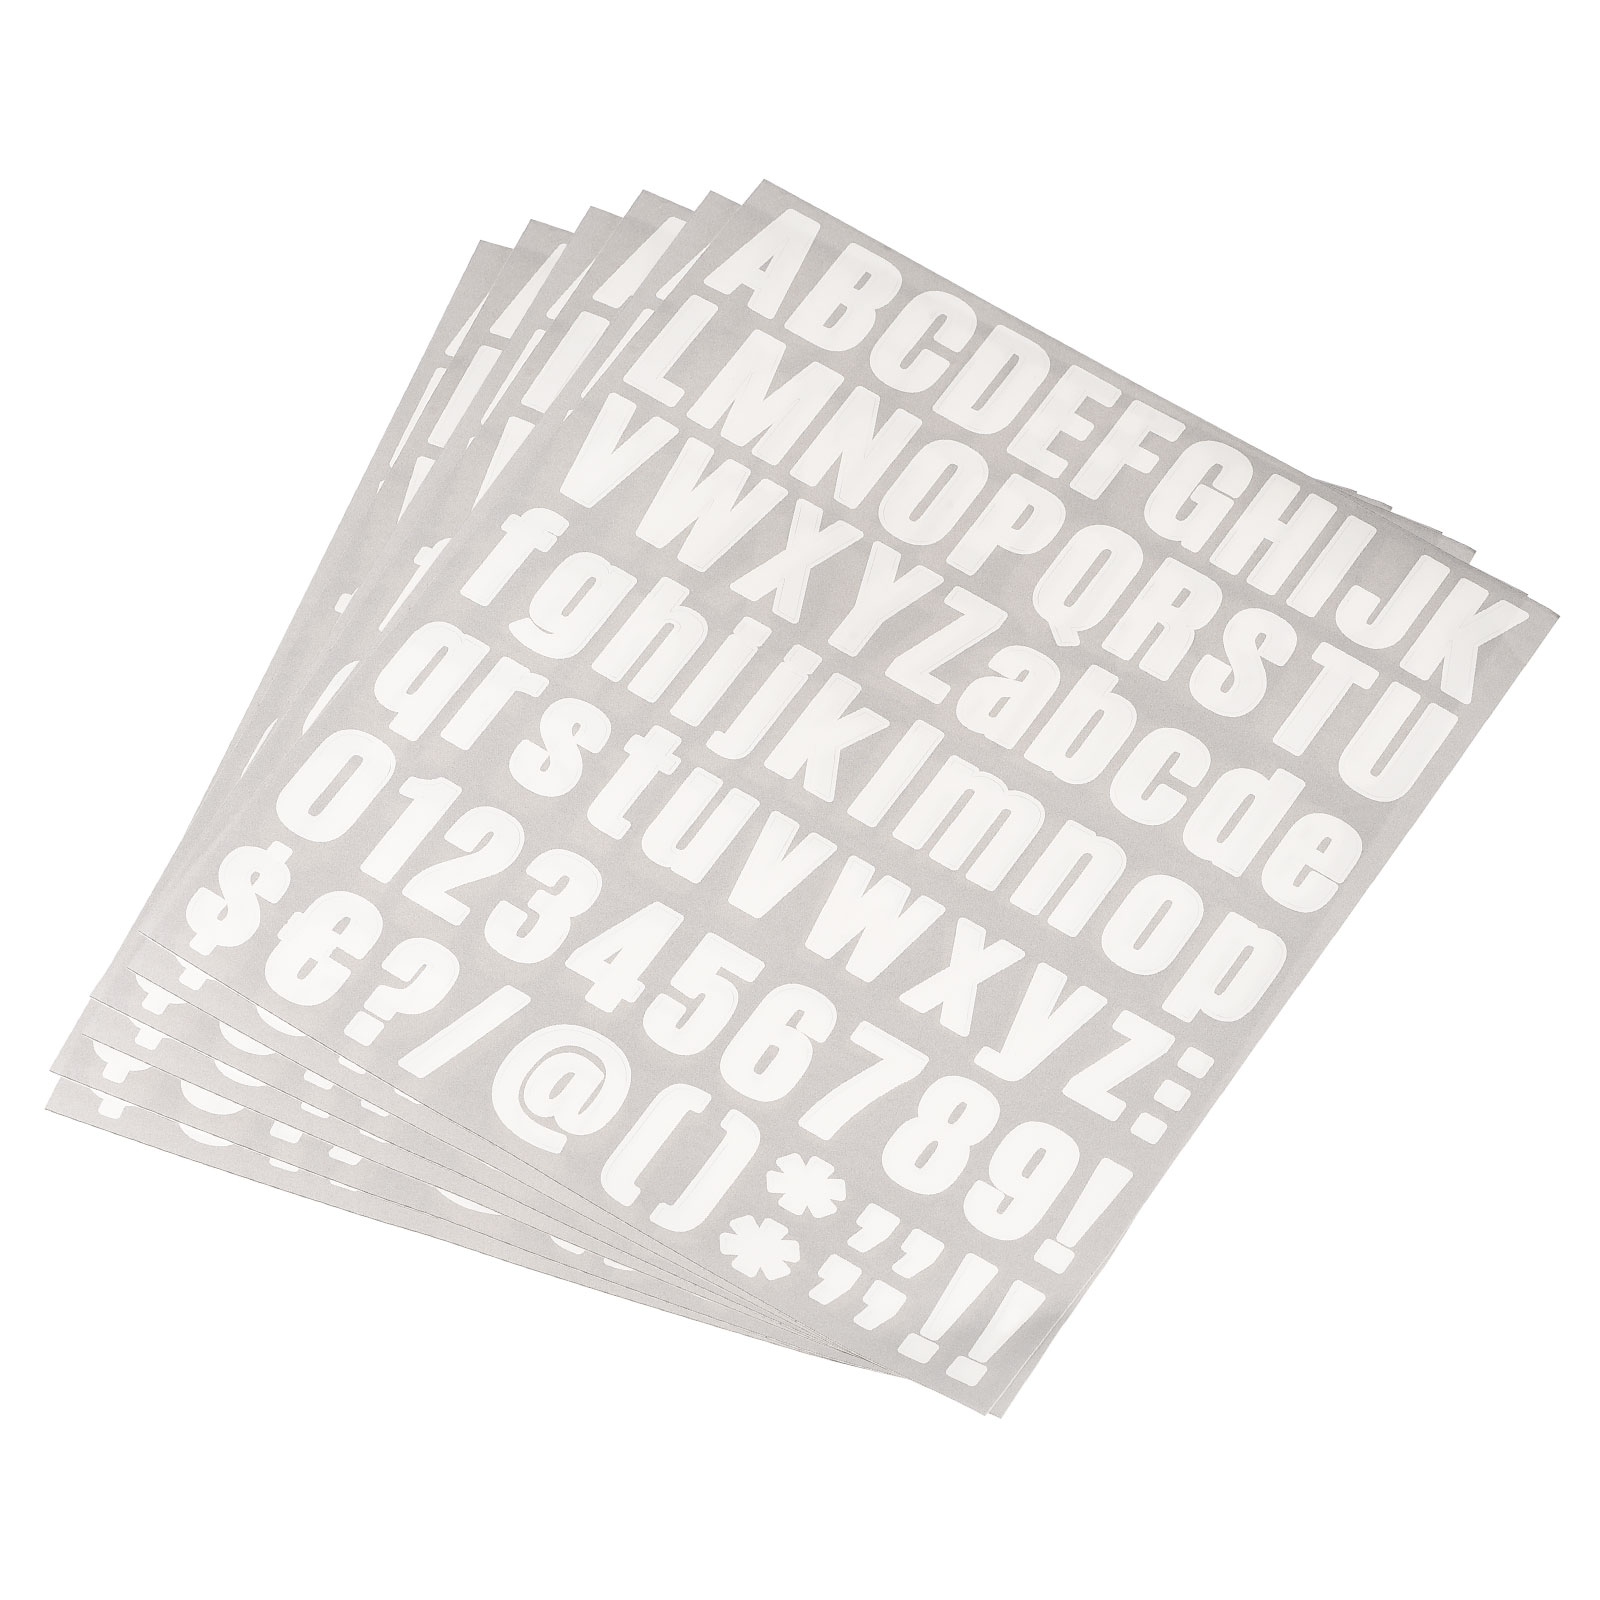 1 inch Self Adhesive Waterproof Vinyl Letter Number Stickers 6 Sheet White